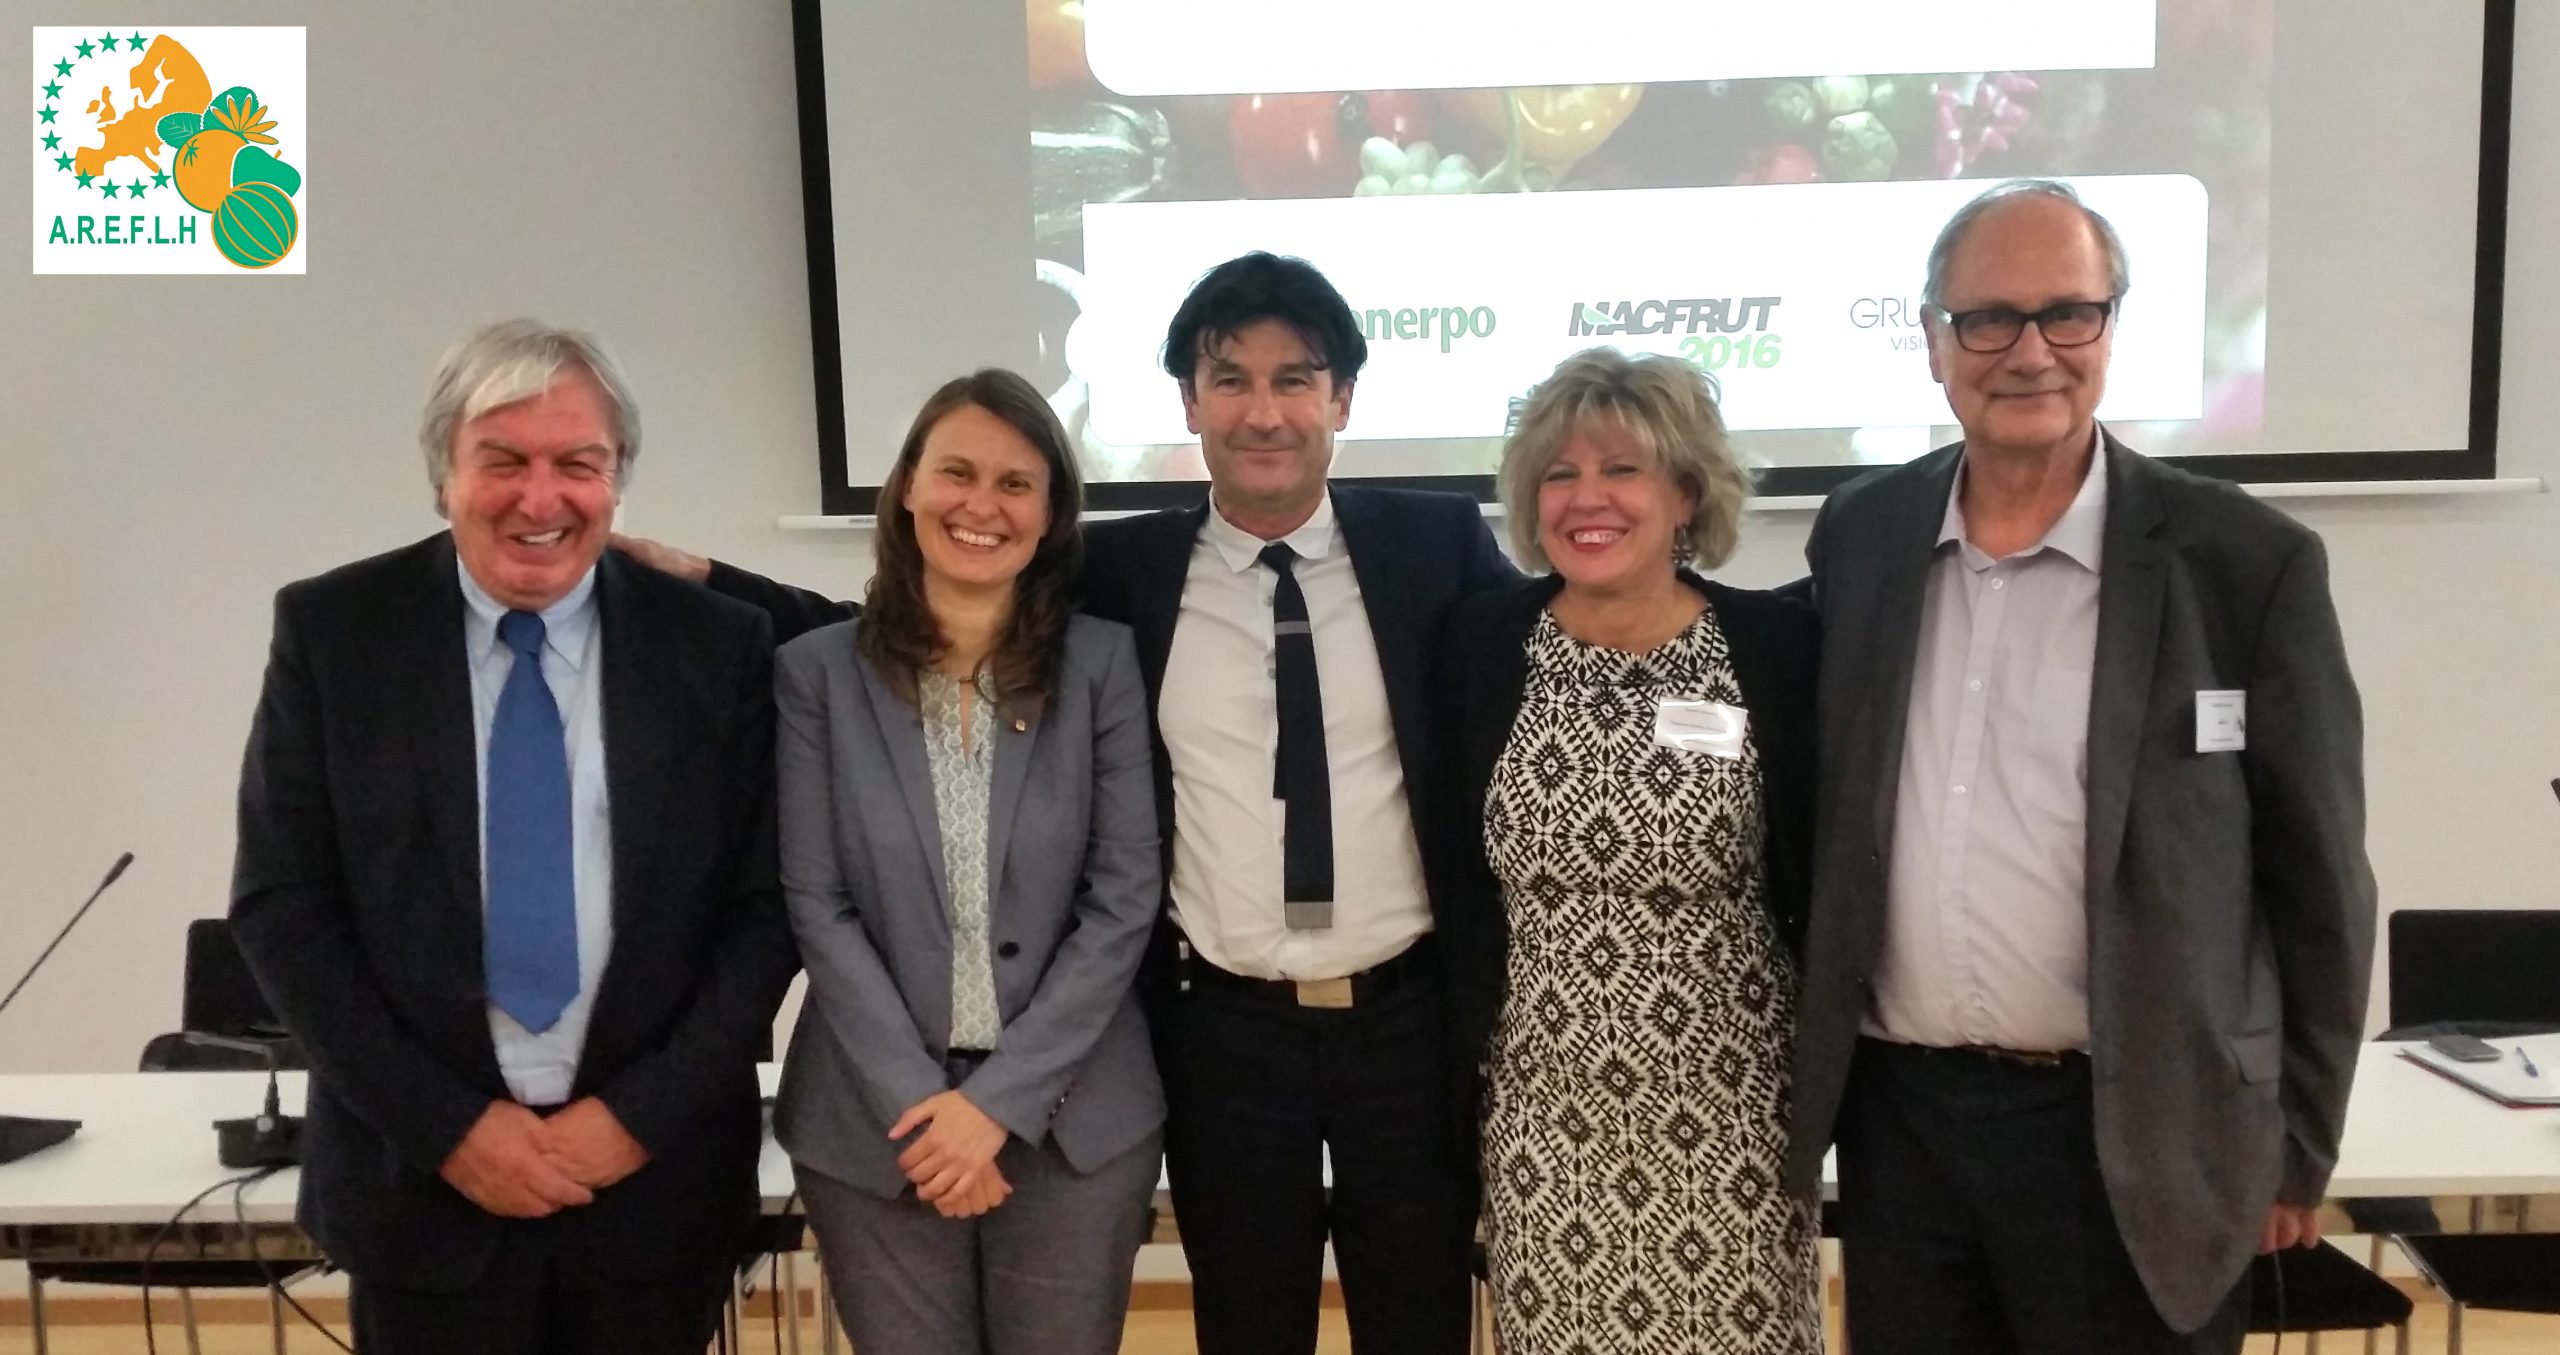 At the AREFLH General Assembly on June 22 in Brussels, Simona Caselli, Councillor of Agriculture for the Emilia-Romagna region, was elected president, succeeding Meritxell Serret i Aleu, Minister of Agriculture in the government of Catalonia.